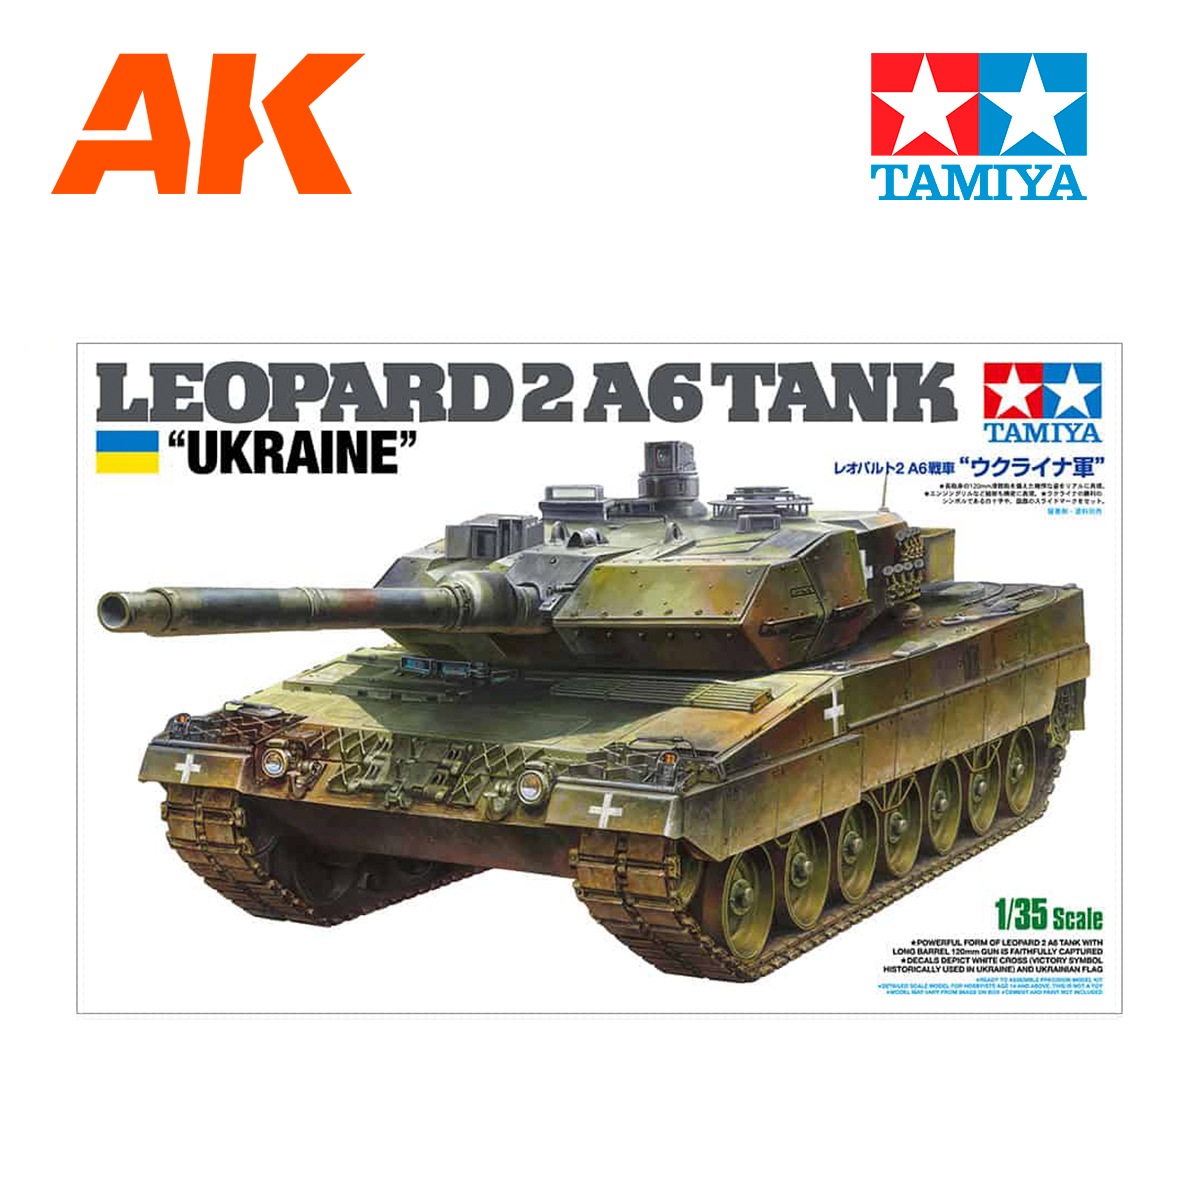 Old school scale models - The classic 1/35 Tamiya Leopard 1 tank